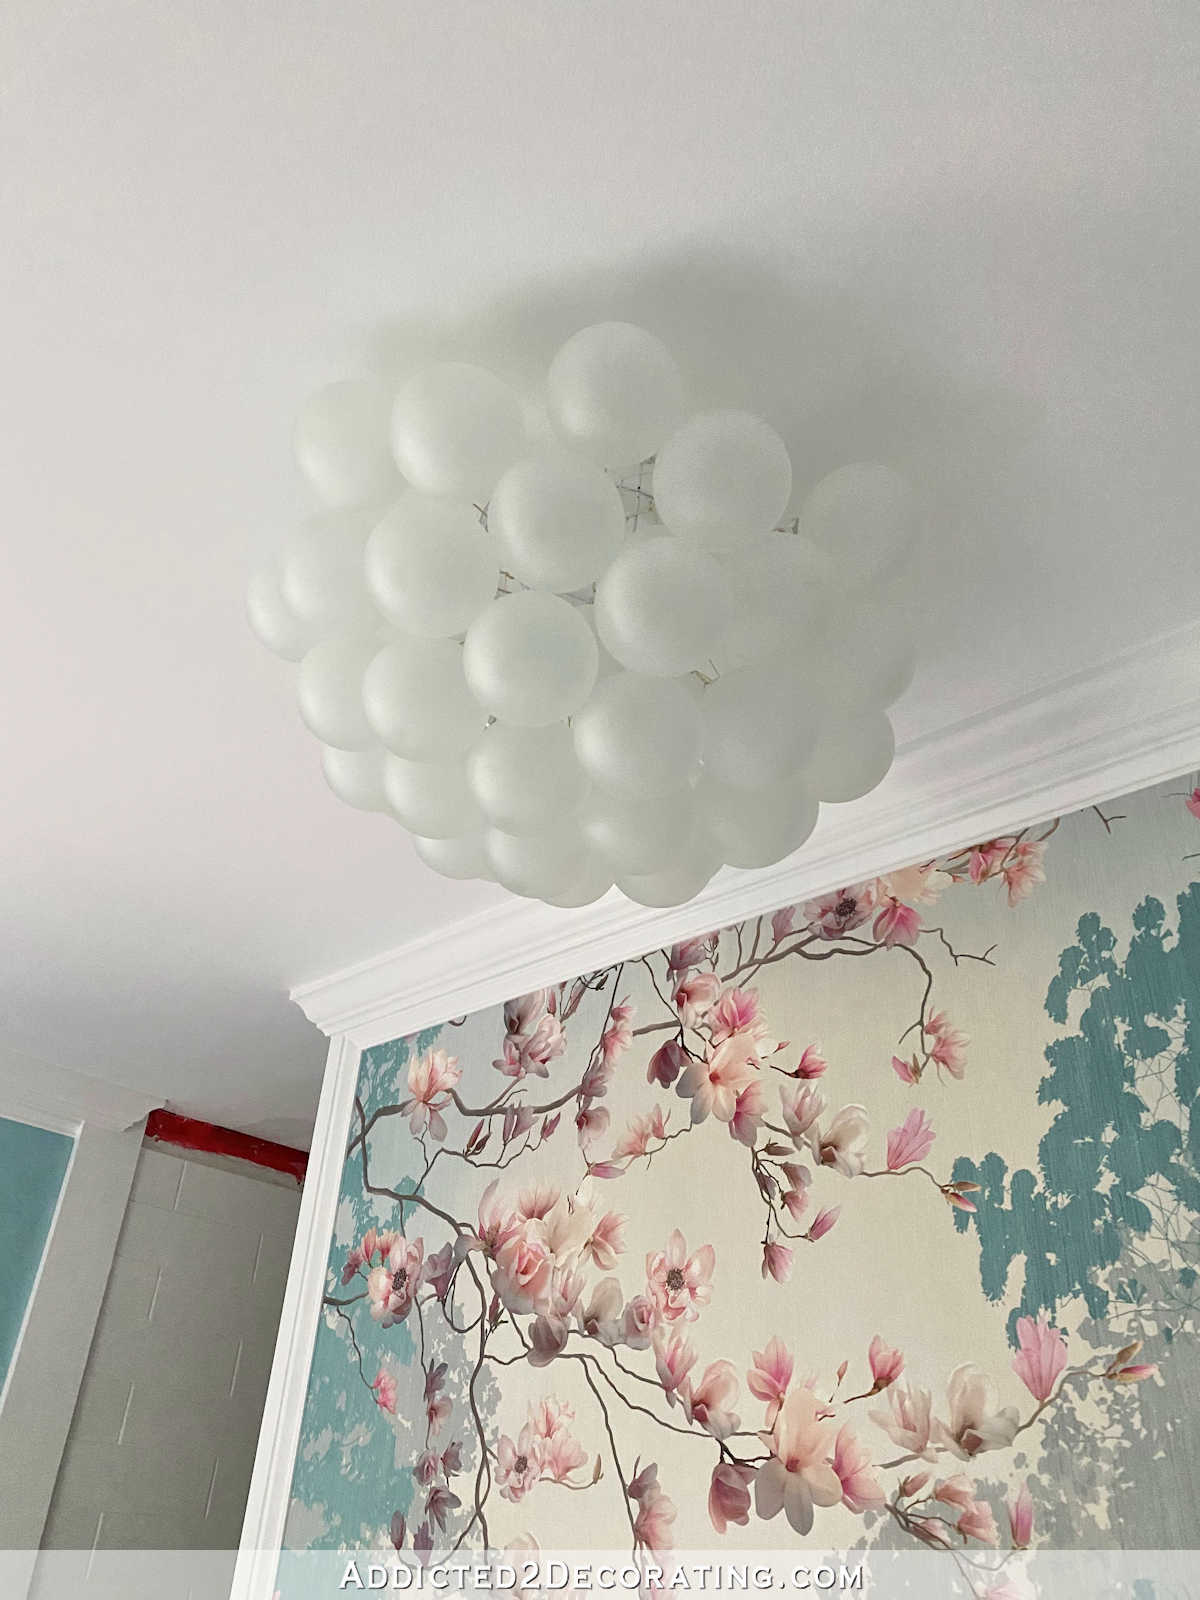 Reconsidering A White Bathroom Ceiling (And A Sneak Peek Of My Bubble Light)